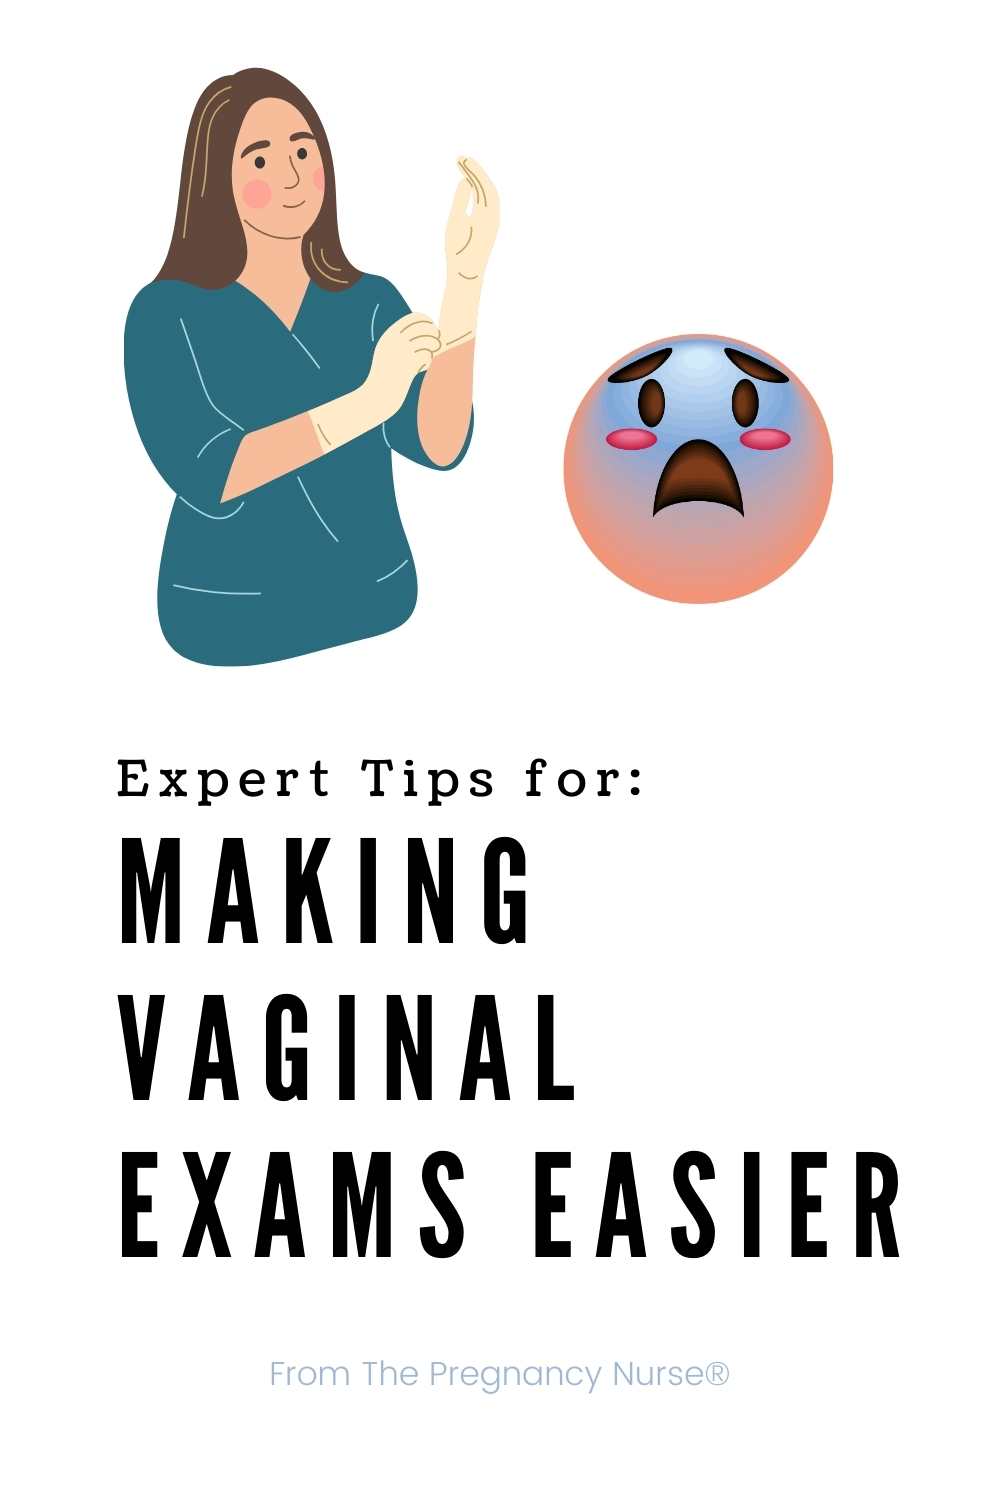 Internal vaginal or cervical exams aren't something that any woman looks forward to, but many women find internal exams during pregnancy almost intolerable because of the pain. Let's talk about why they are so painful and what you can do to make cervical checks easier to handle. via @pullingcurls